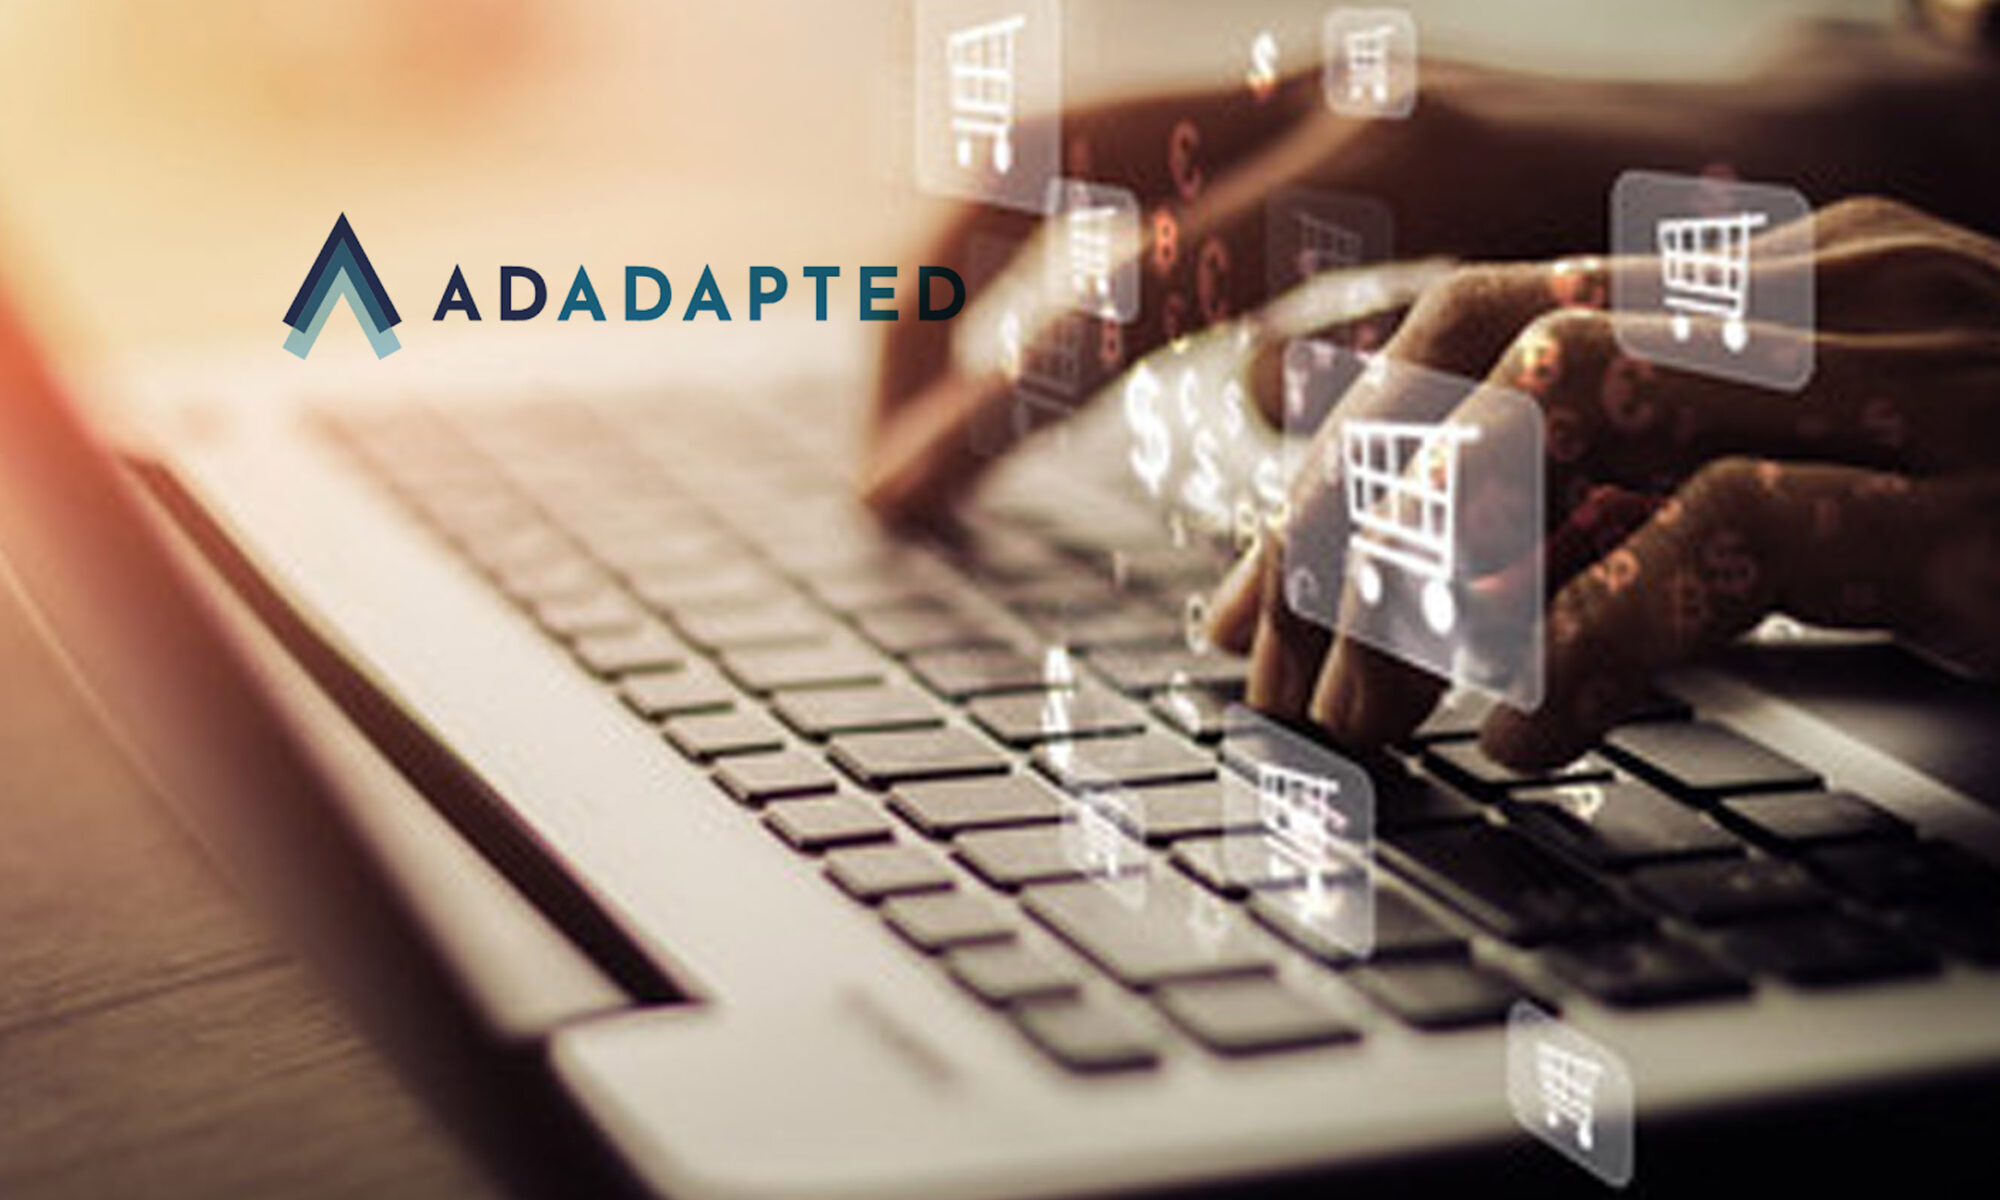 AdAdapted Announces New Add-to-Cart eCommerce Capabilities for Direct, Its Self-Managed Shopper Advertising Solution